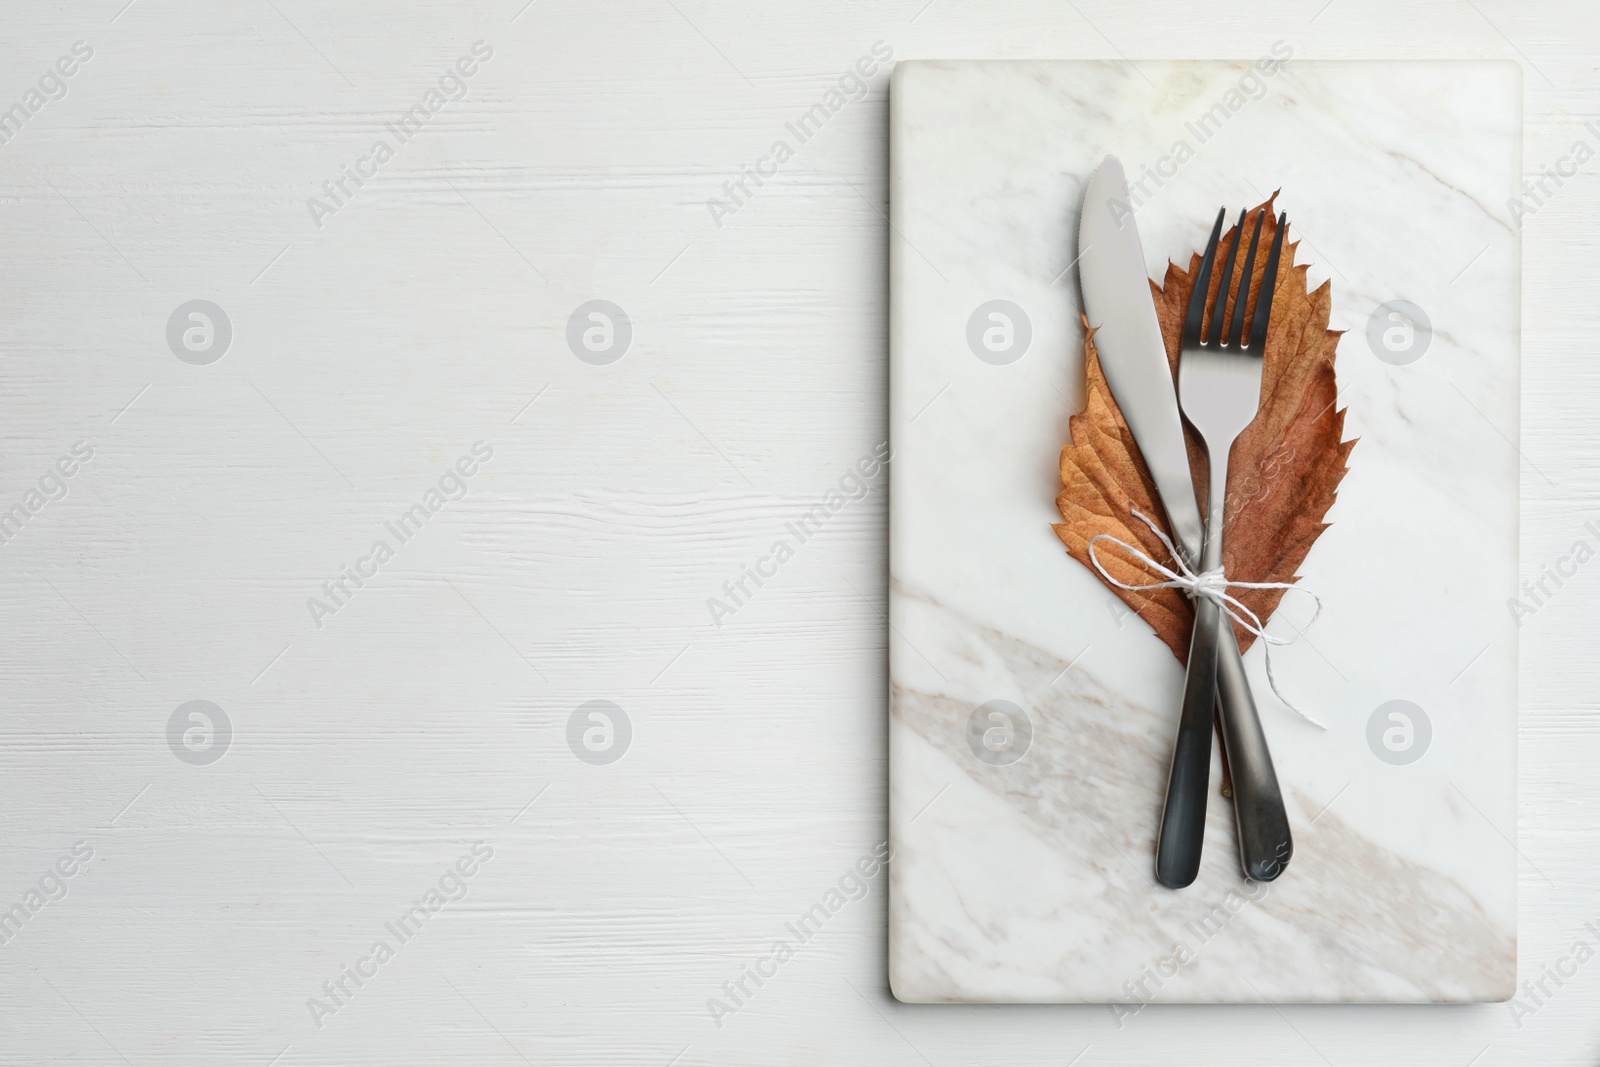 Photo of Cutlery, dry leaf and marble board on white wooden background, top view with space for text. Table setting elements